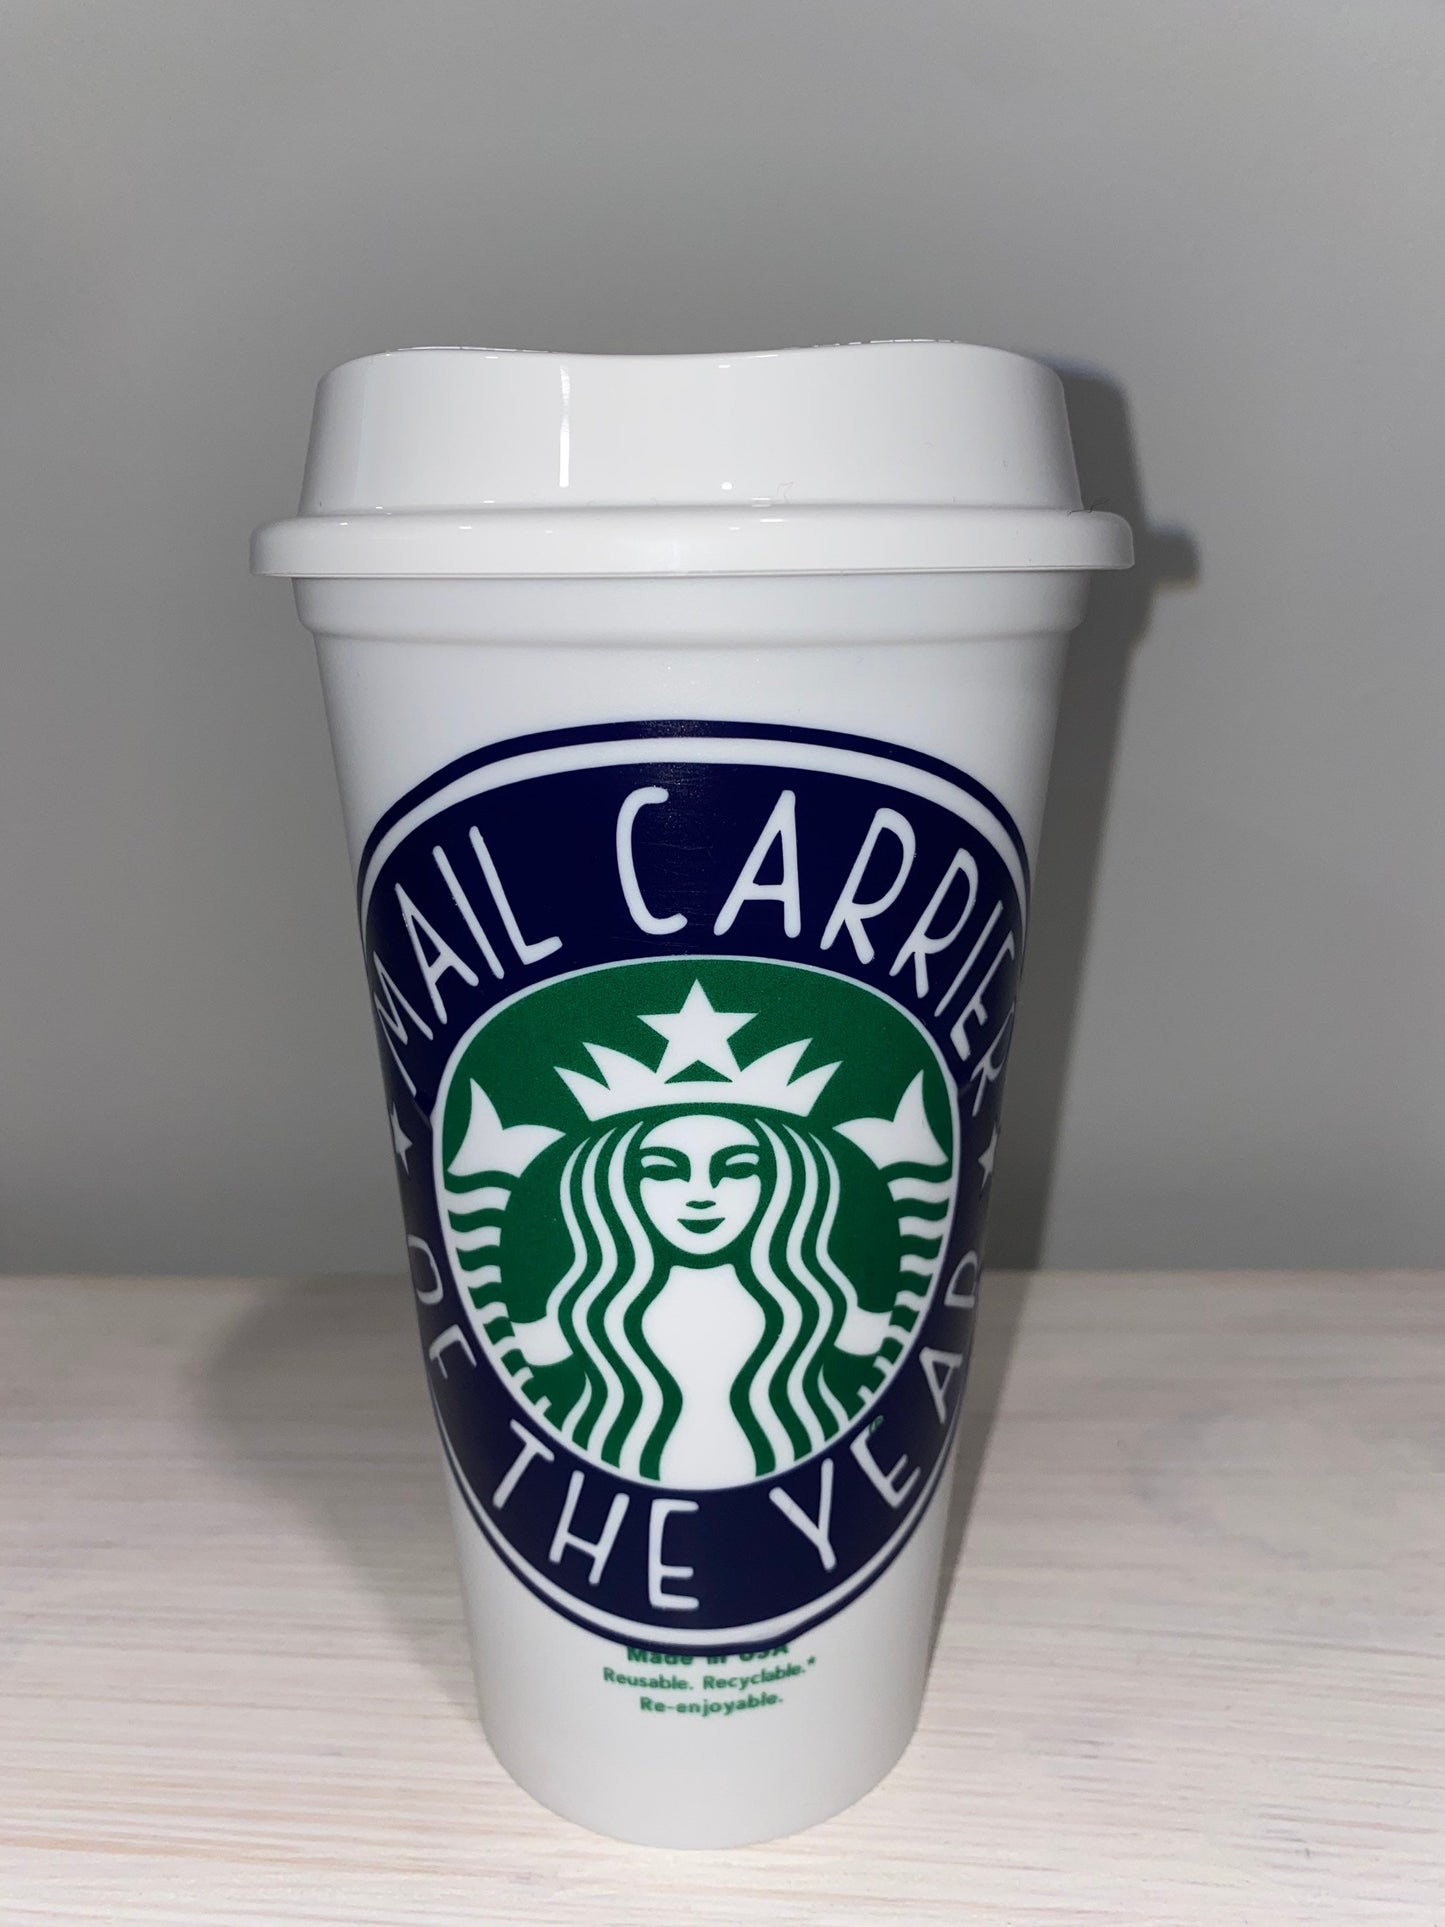 Mail Carrier of The Year Cup, mail carrier gift, mailman gift, essential worker gift, usps gift, usps starbucks